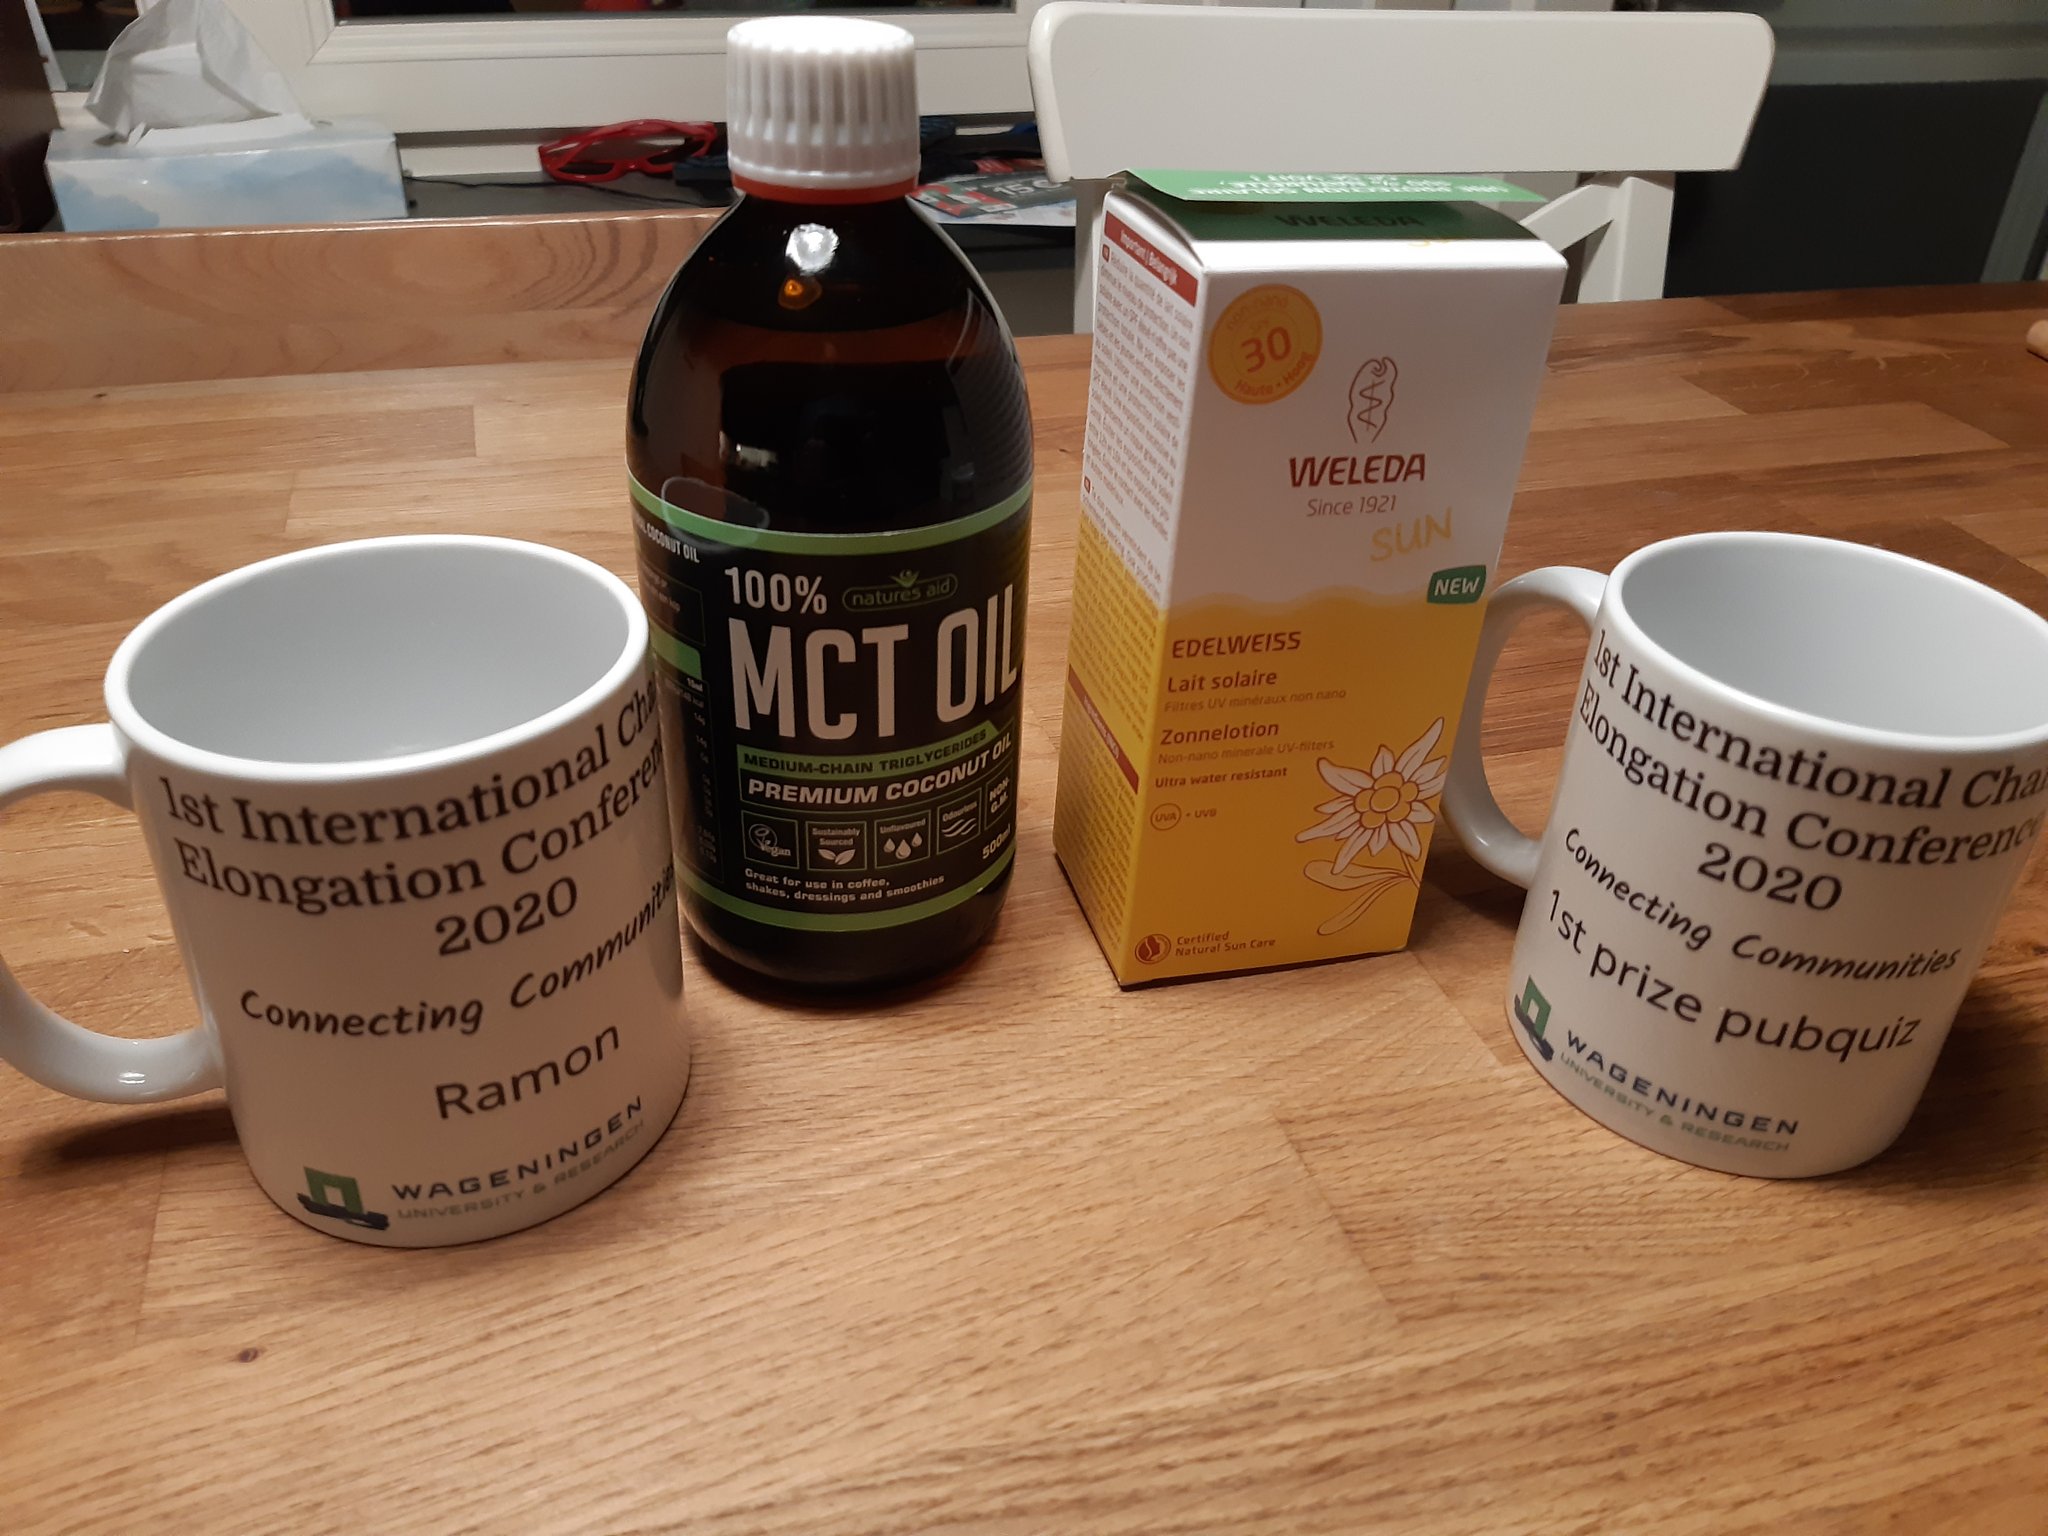 Uendelighed Prime Grundig Ramon Ganigué on Twitter: "Late Sinterklaas or early Santa. Happy to  receive these MCCA-based products and goodies from the 1st (but not last)  ICEC. Thank you David Strik and team for the